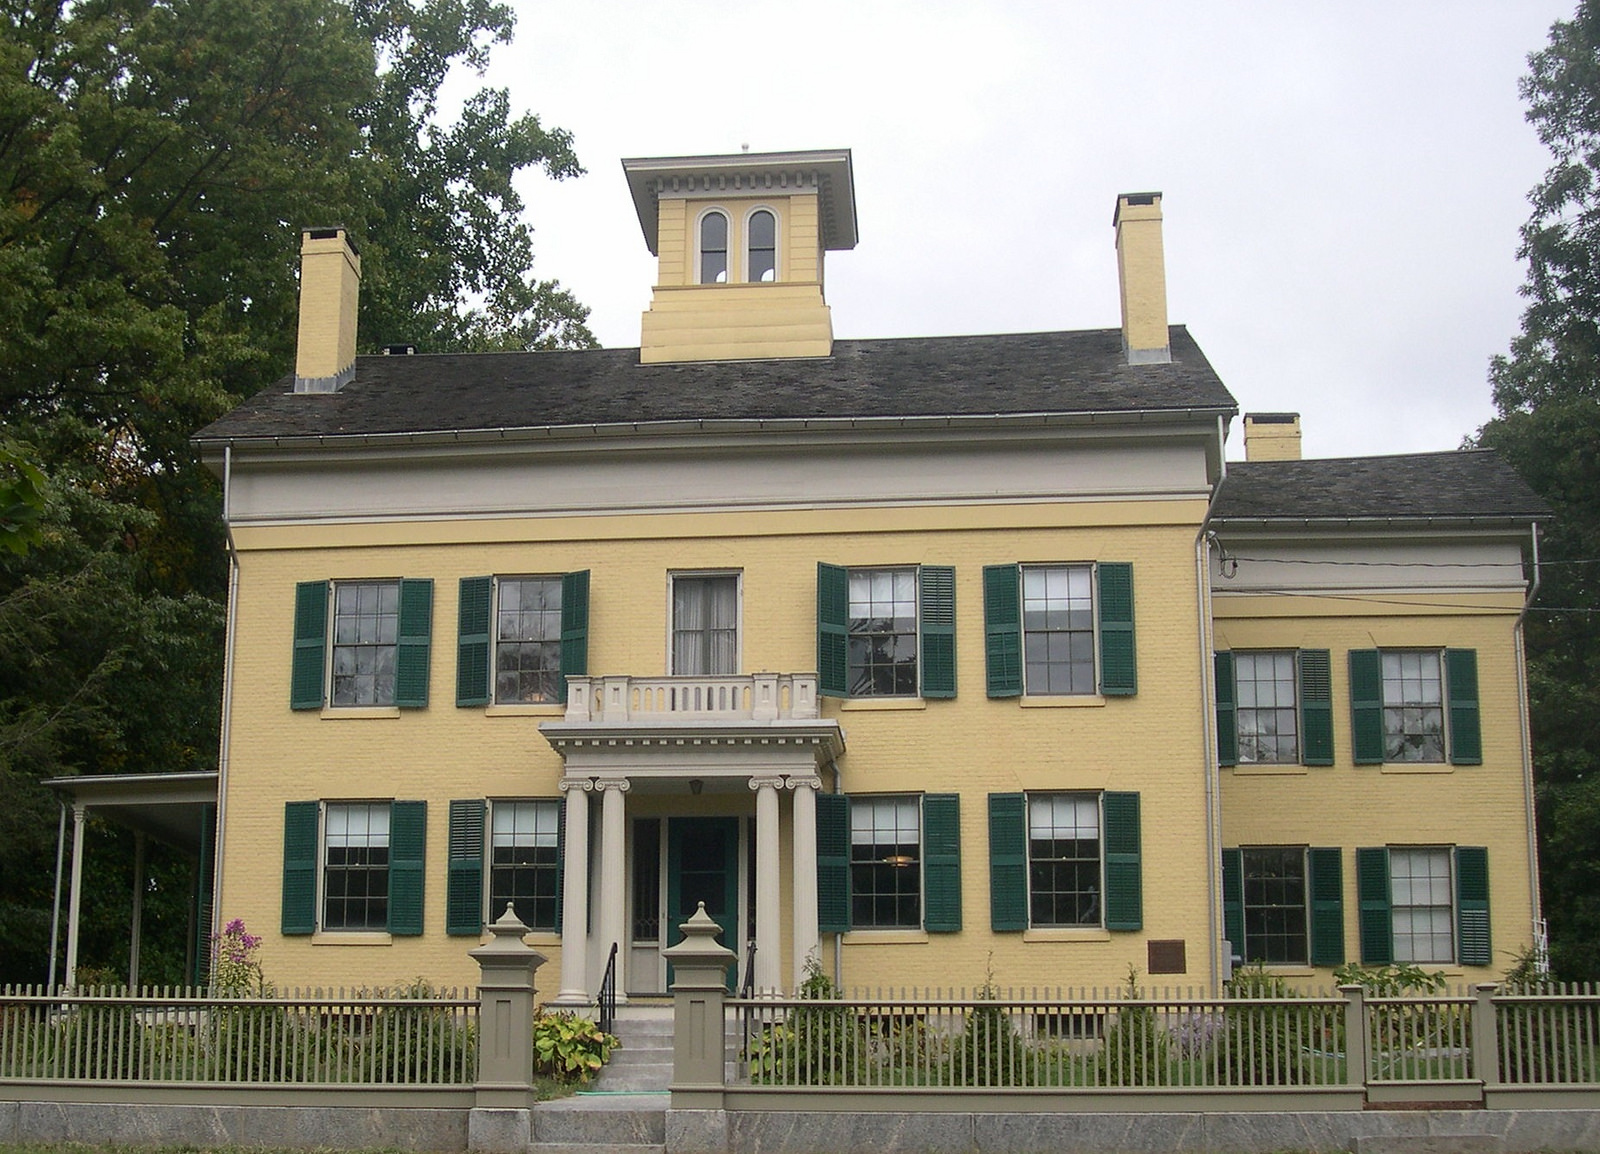 Emily dickinson's house in amherst, ma